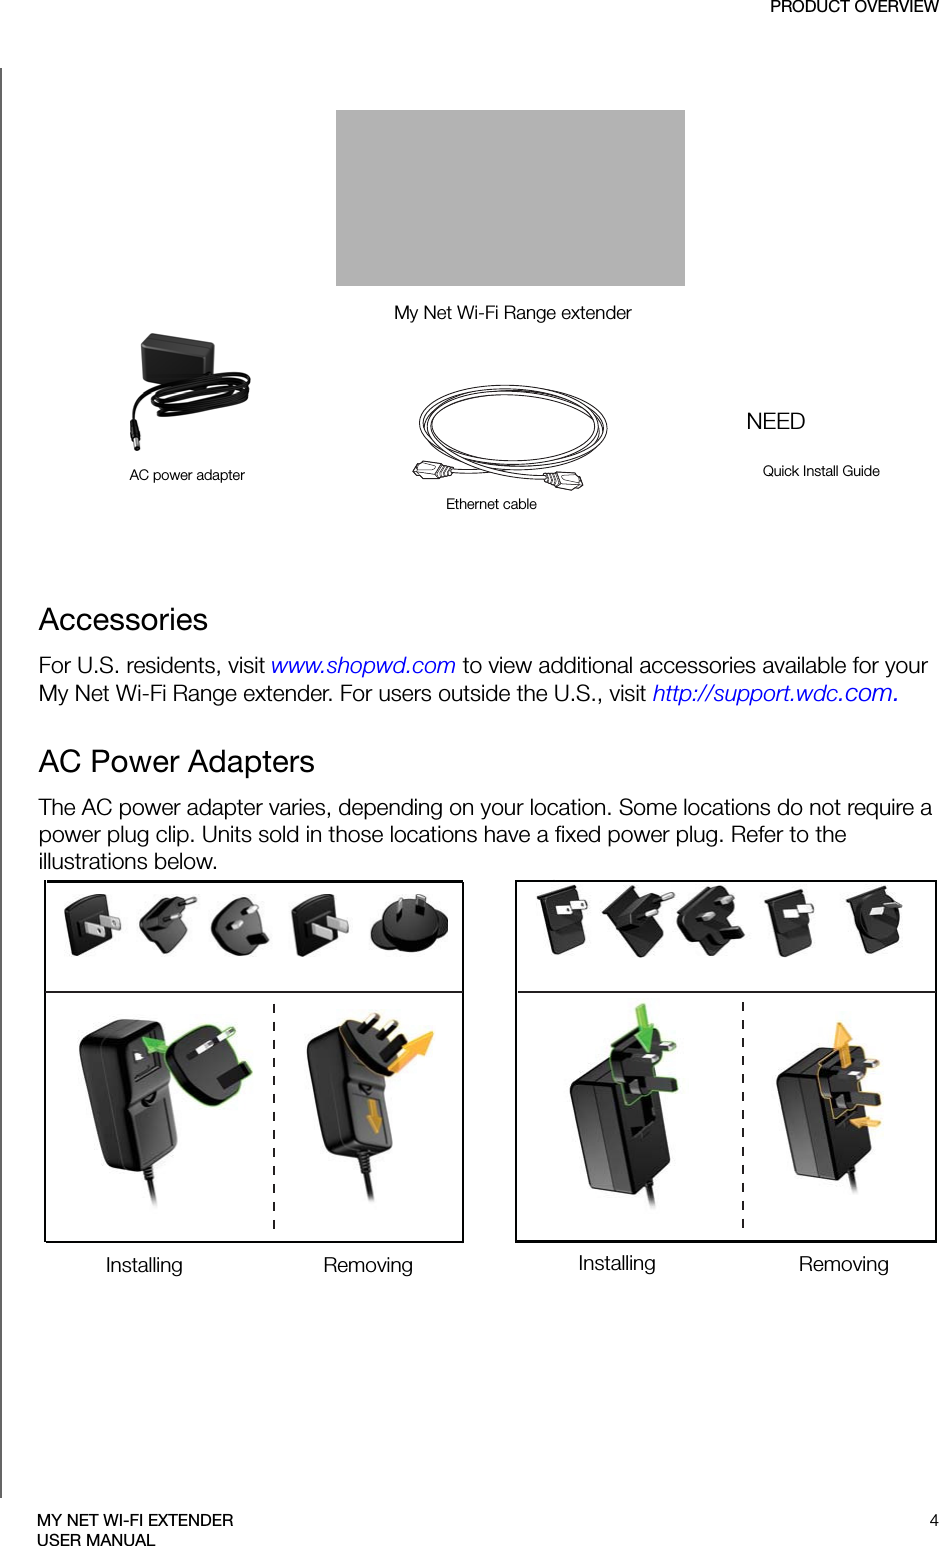 My Net Wi-Fi Range extenderAC power adapterEthernet cableQuick Install GuideNEEDPRODUCT OVERVIEW4MY NET WI-FI EXTENDERUSER MANUALAccessories For U.S. residents, visit www.shopwd.com to view additional accessories available for your My Net Wi-Fi Range extender. For users outside the U.S., visit http://support.wdc.com.AC Power AdaptersThe AC power adapter varies, depending on your location. Some locations do not require a power plug clip. Units sold in those locations have a fixed power plug. Refer to the illustrations below.EU/KO EU/KOUS/JA/TW US/JA/TWInstalling InstallingRemoving Removing